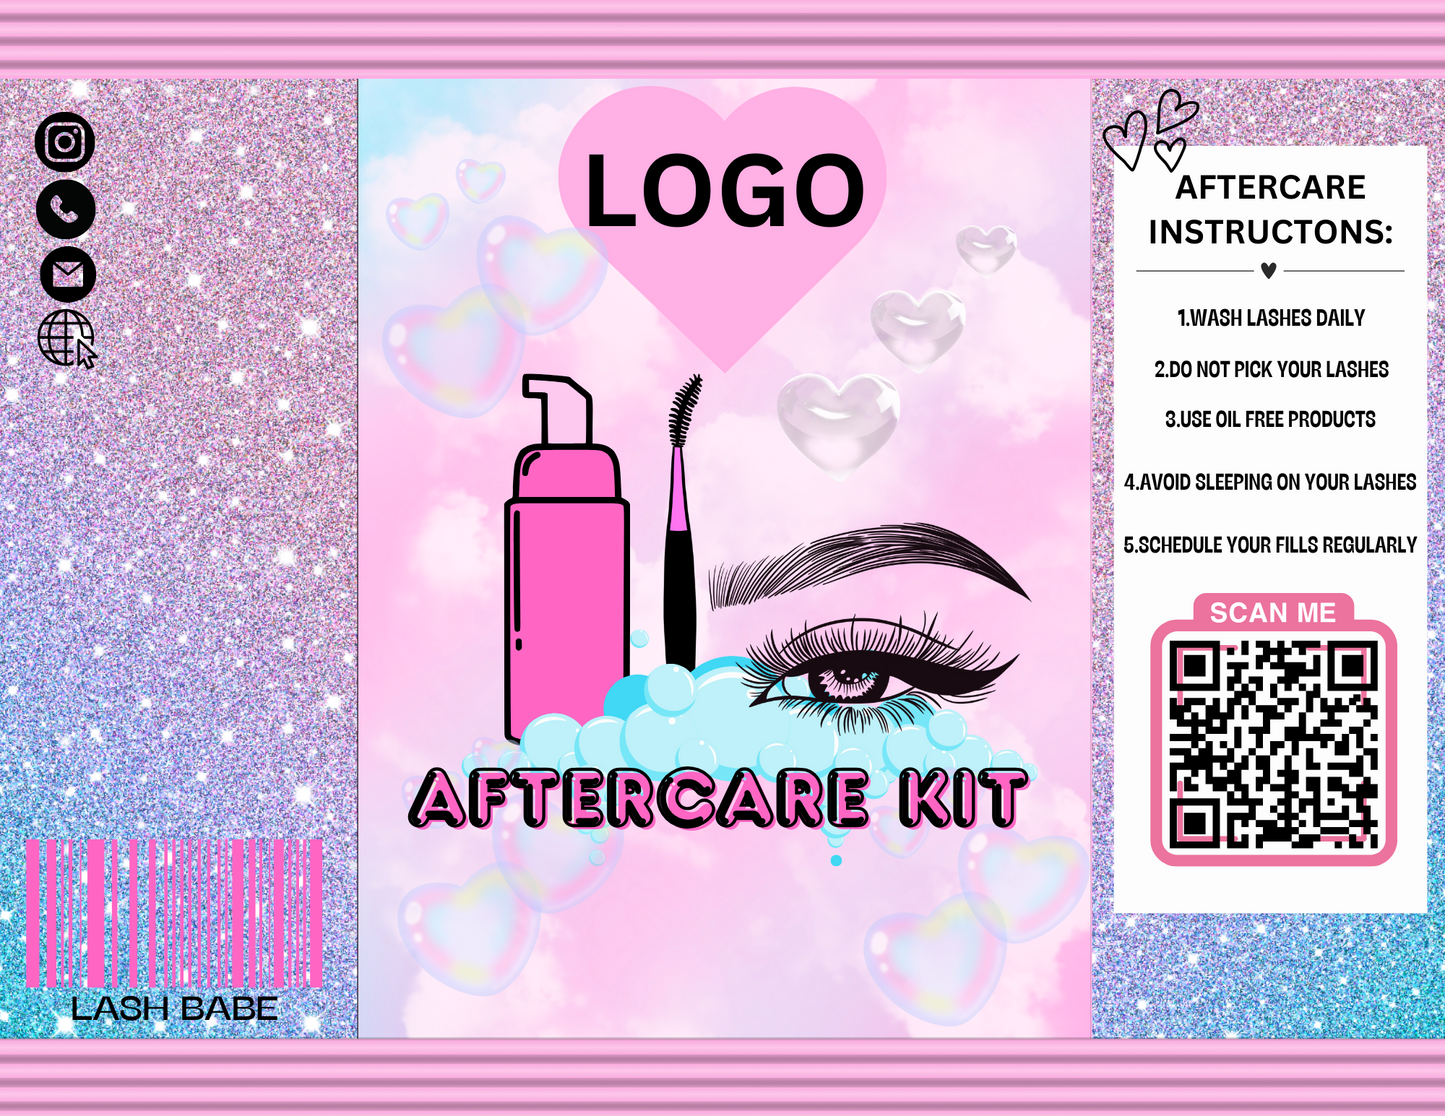 AfterCare Kit Bags